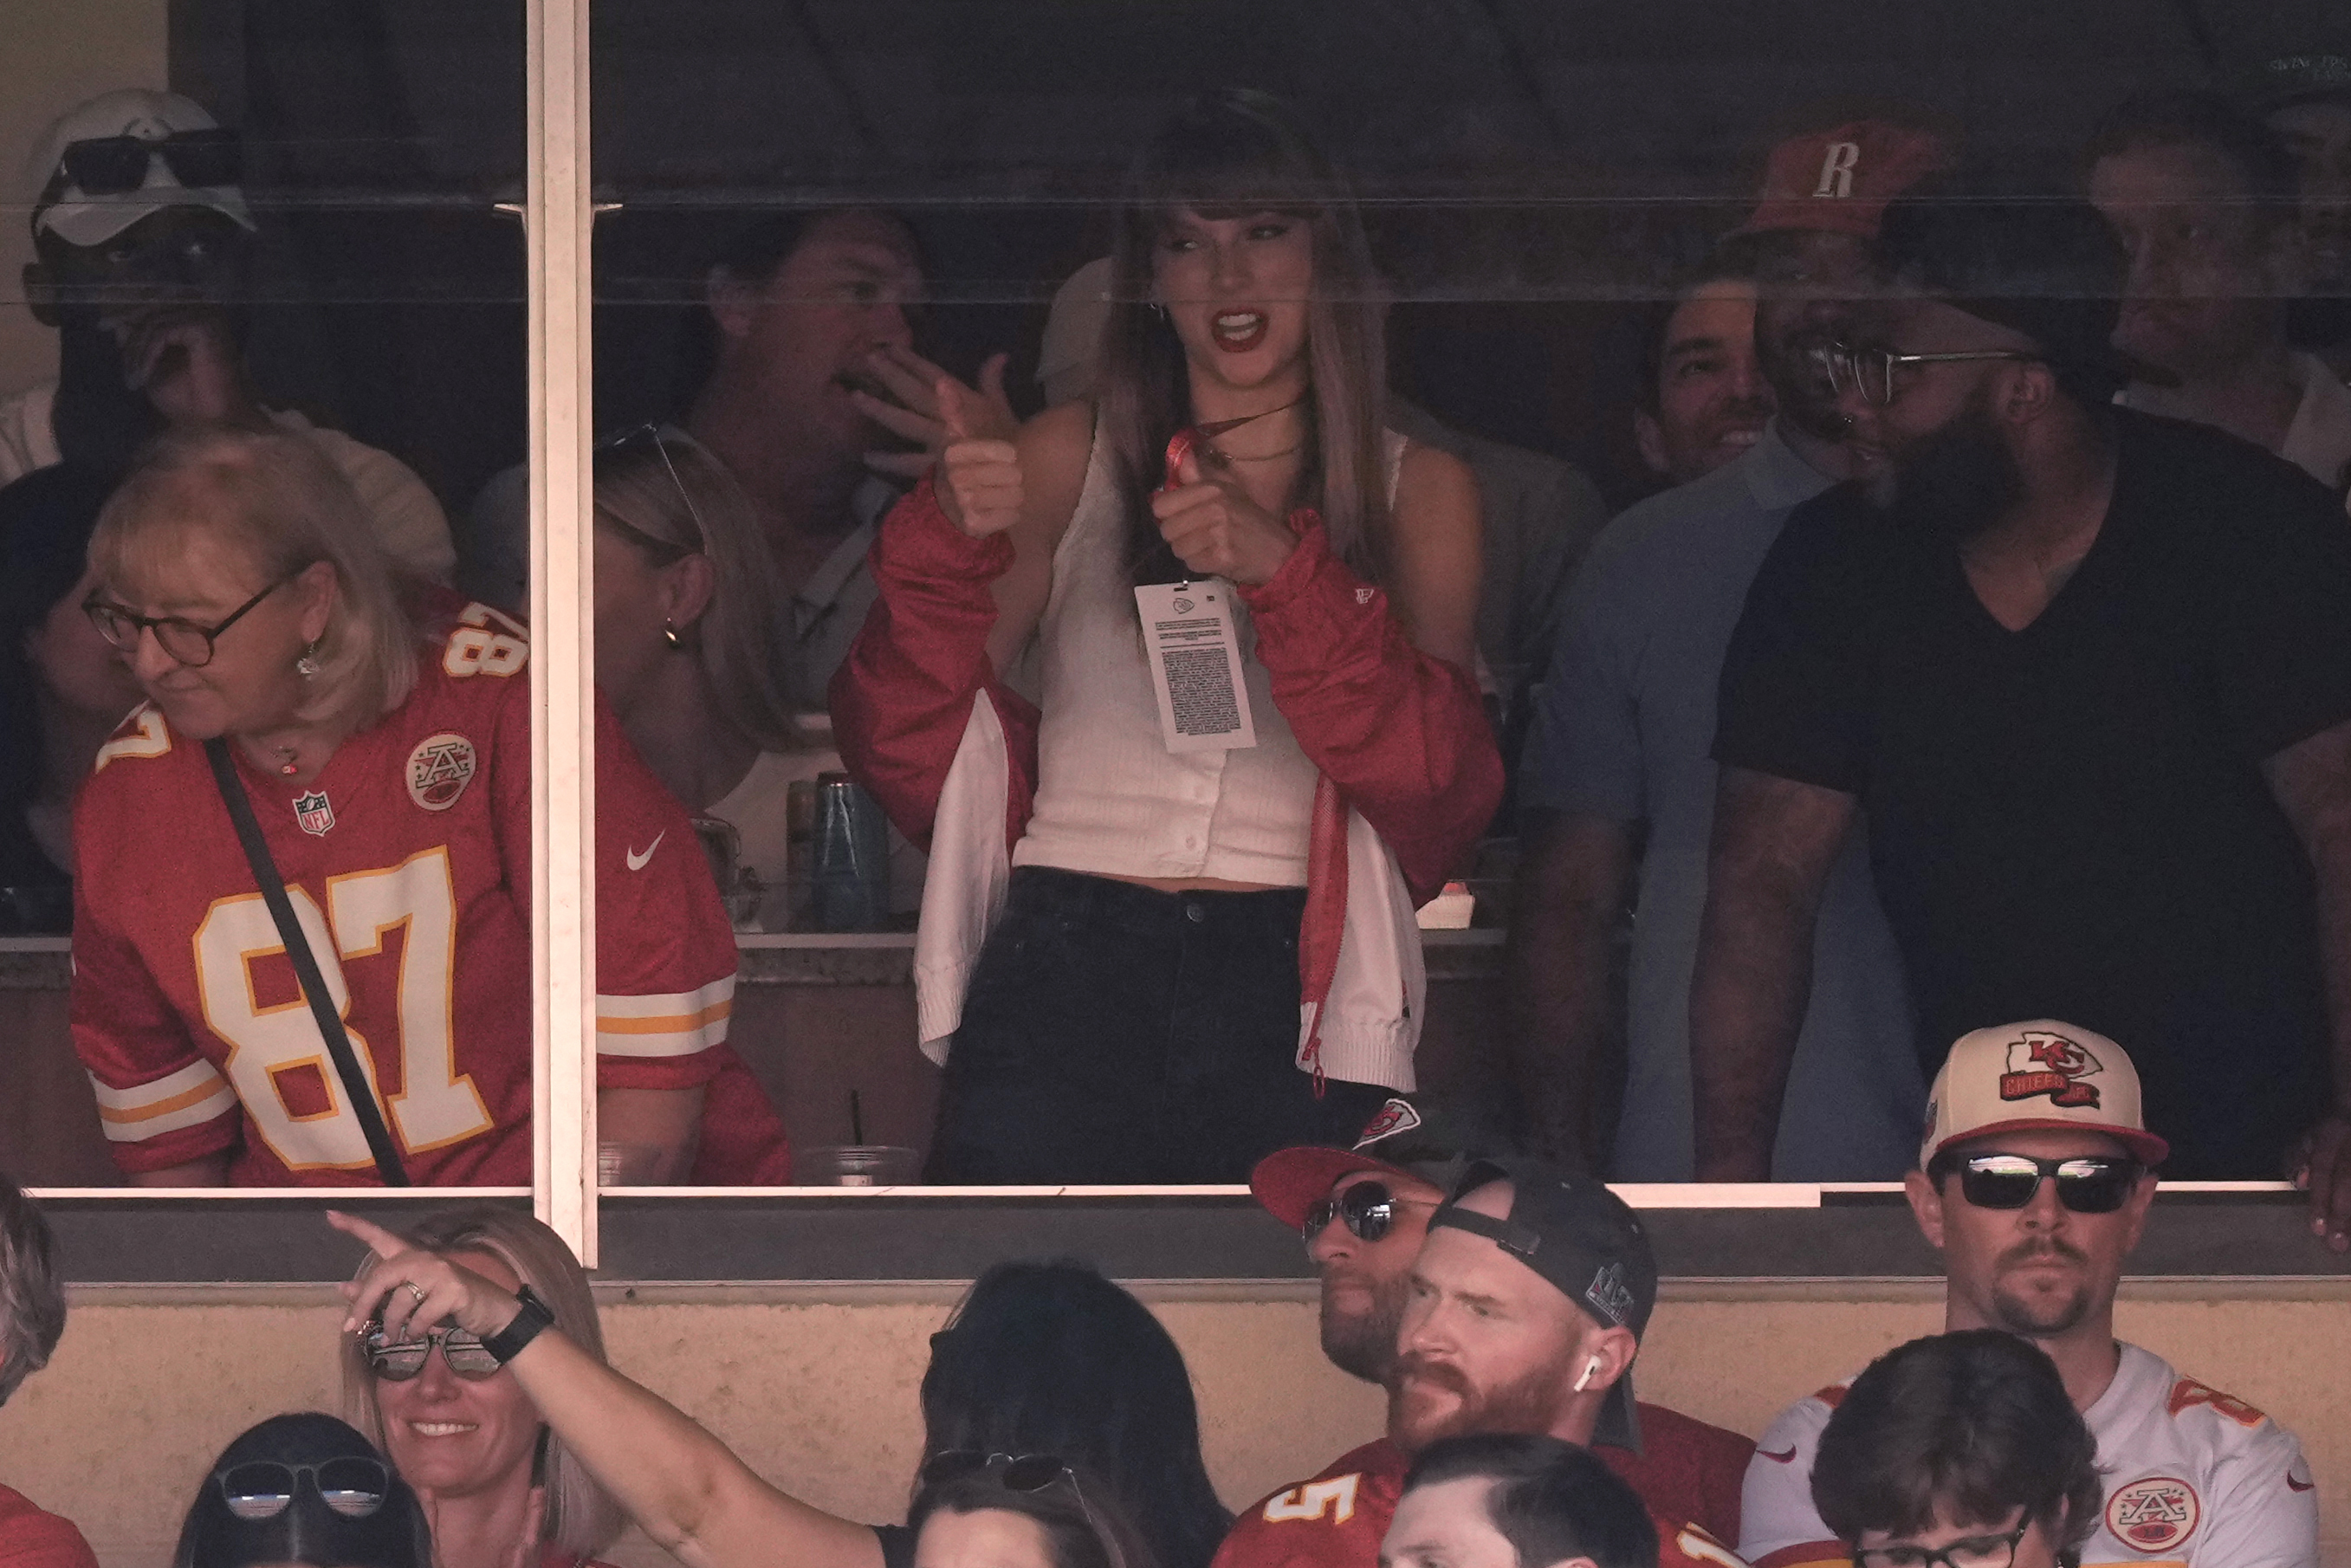 Taylor Swift's attendance at Chiefs game brings a spike in Travis